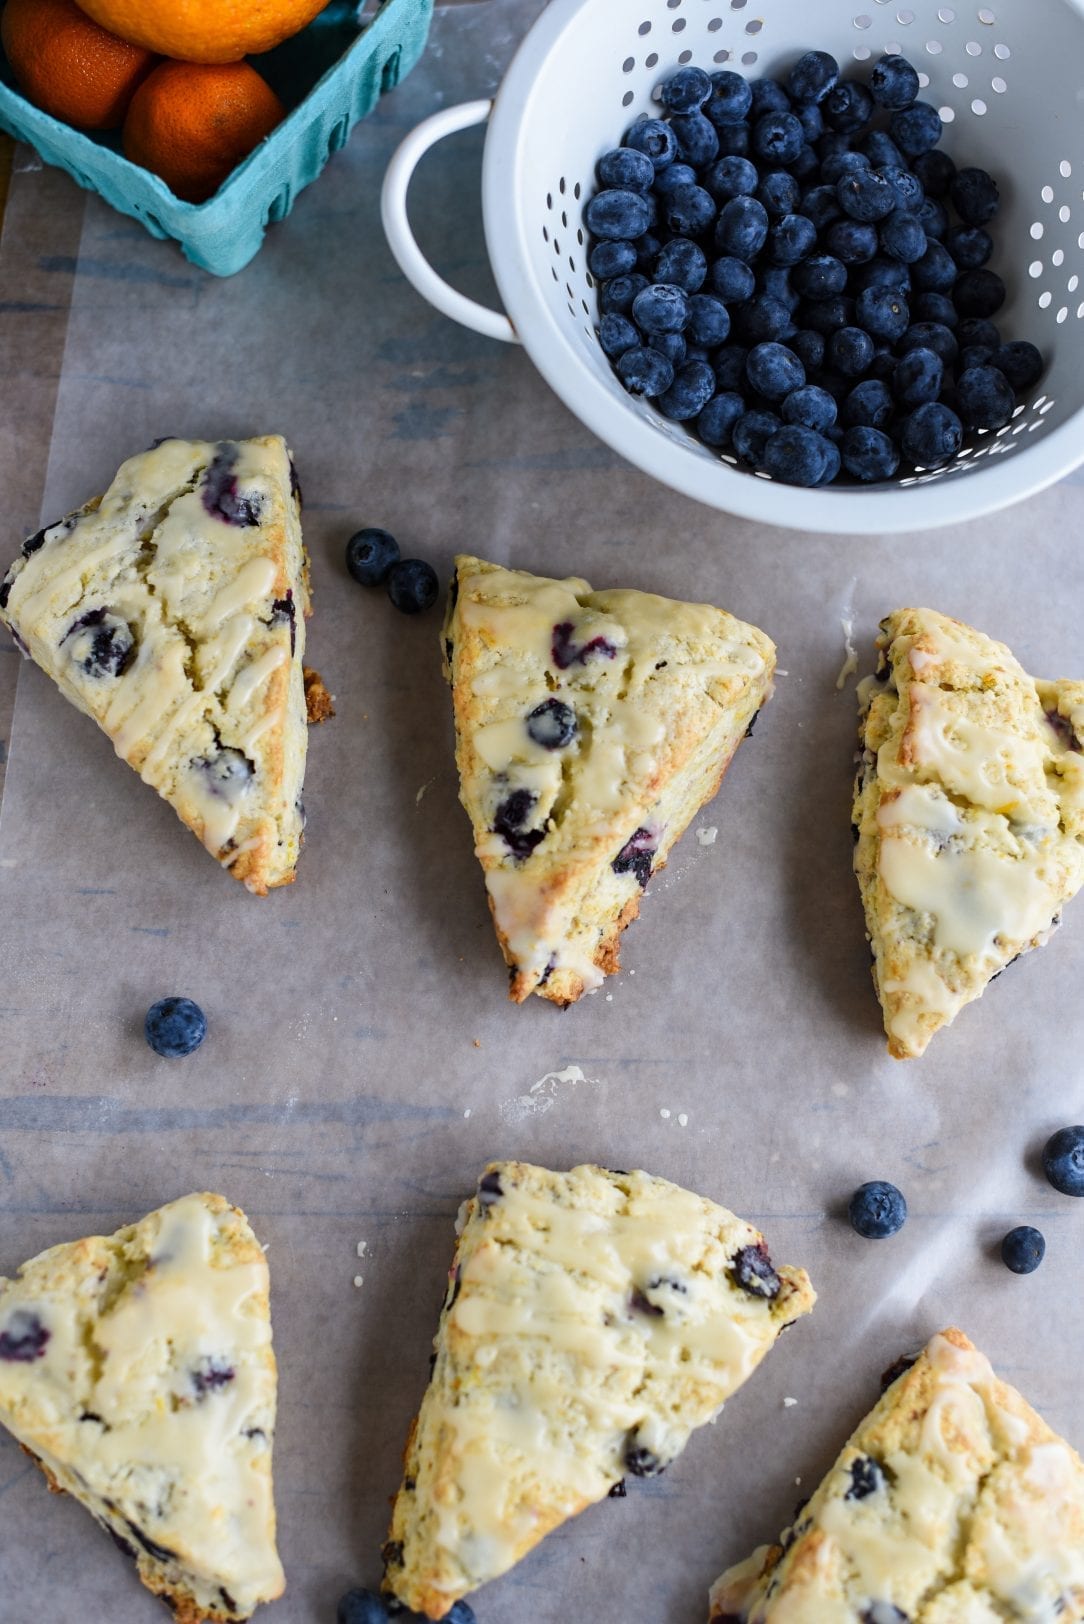 Easter might look a little different this year, but that doesn't mean brunch doesn't go on! These Blueberry Citrus Scones will be the perfect addition!